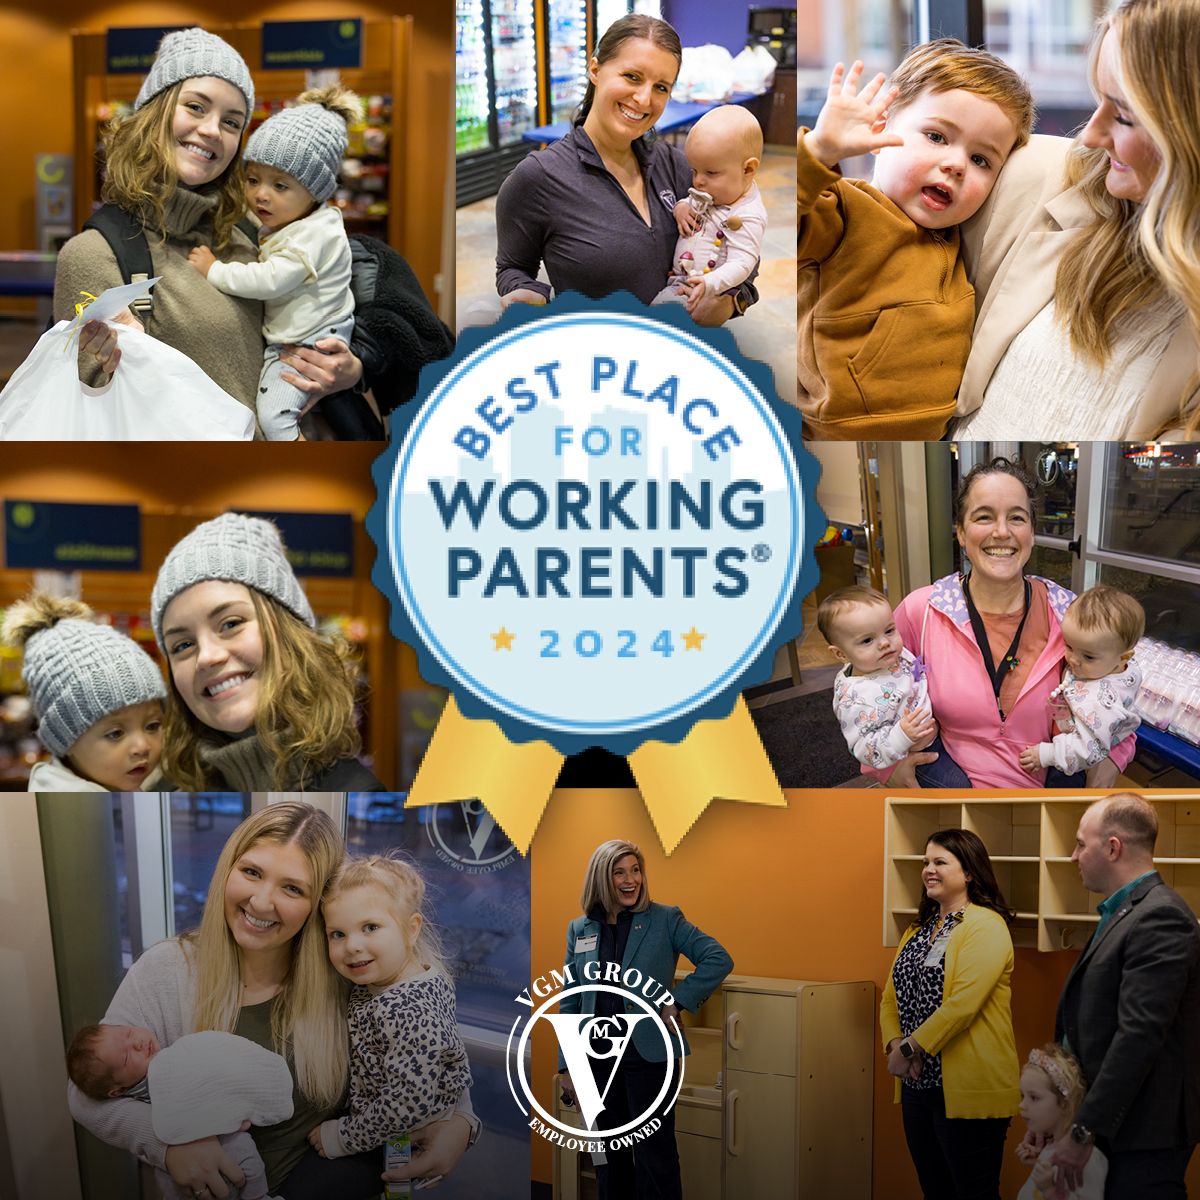 Kudos to @VGMGroupInc for earning the designation of a Best Place for Working Parents®! Curious to see if your company meets the mark? Take our quick 3-minute self-assessment and compare your company's standing: bit.ly/3LHREZy